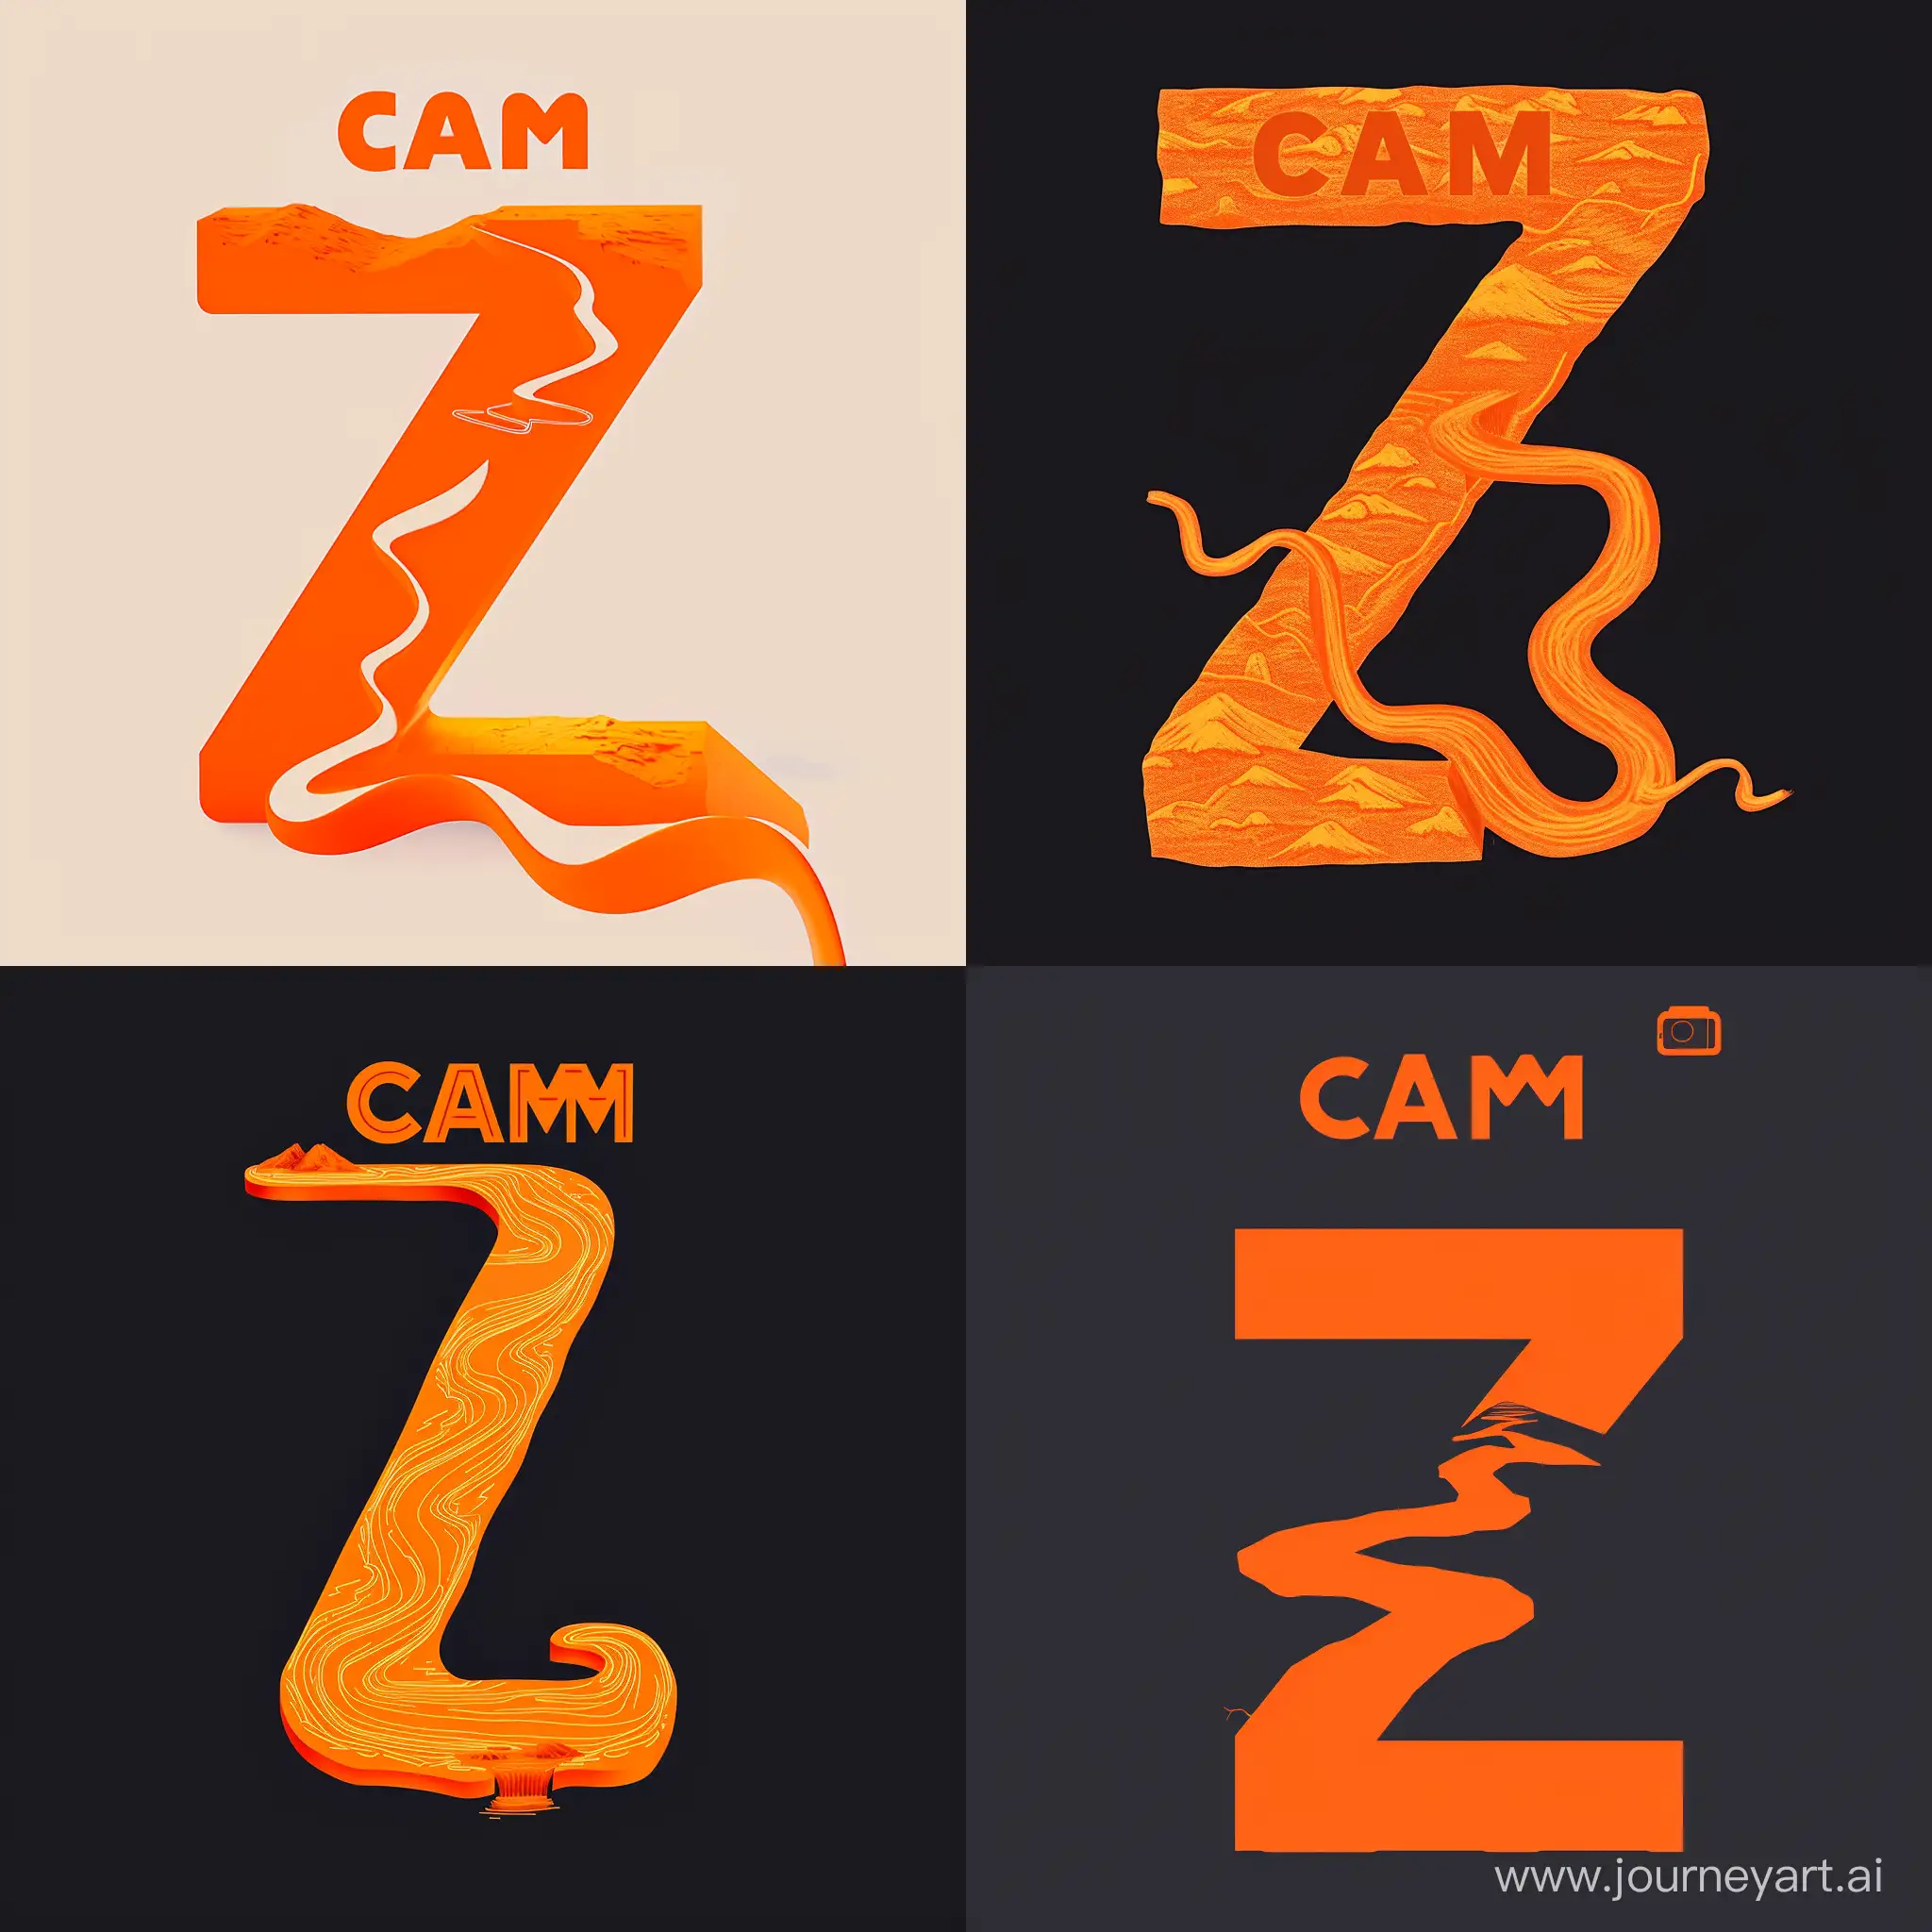 Generate an image with an orange letter Z where the end of the letter turns into a meandering river in orange, and above the river there is an orange word "CAM"